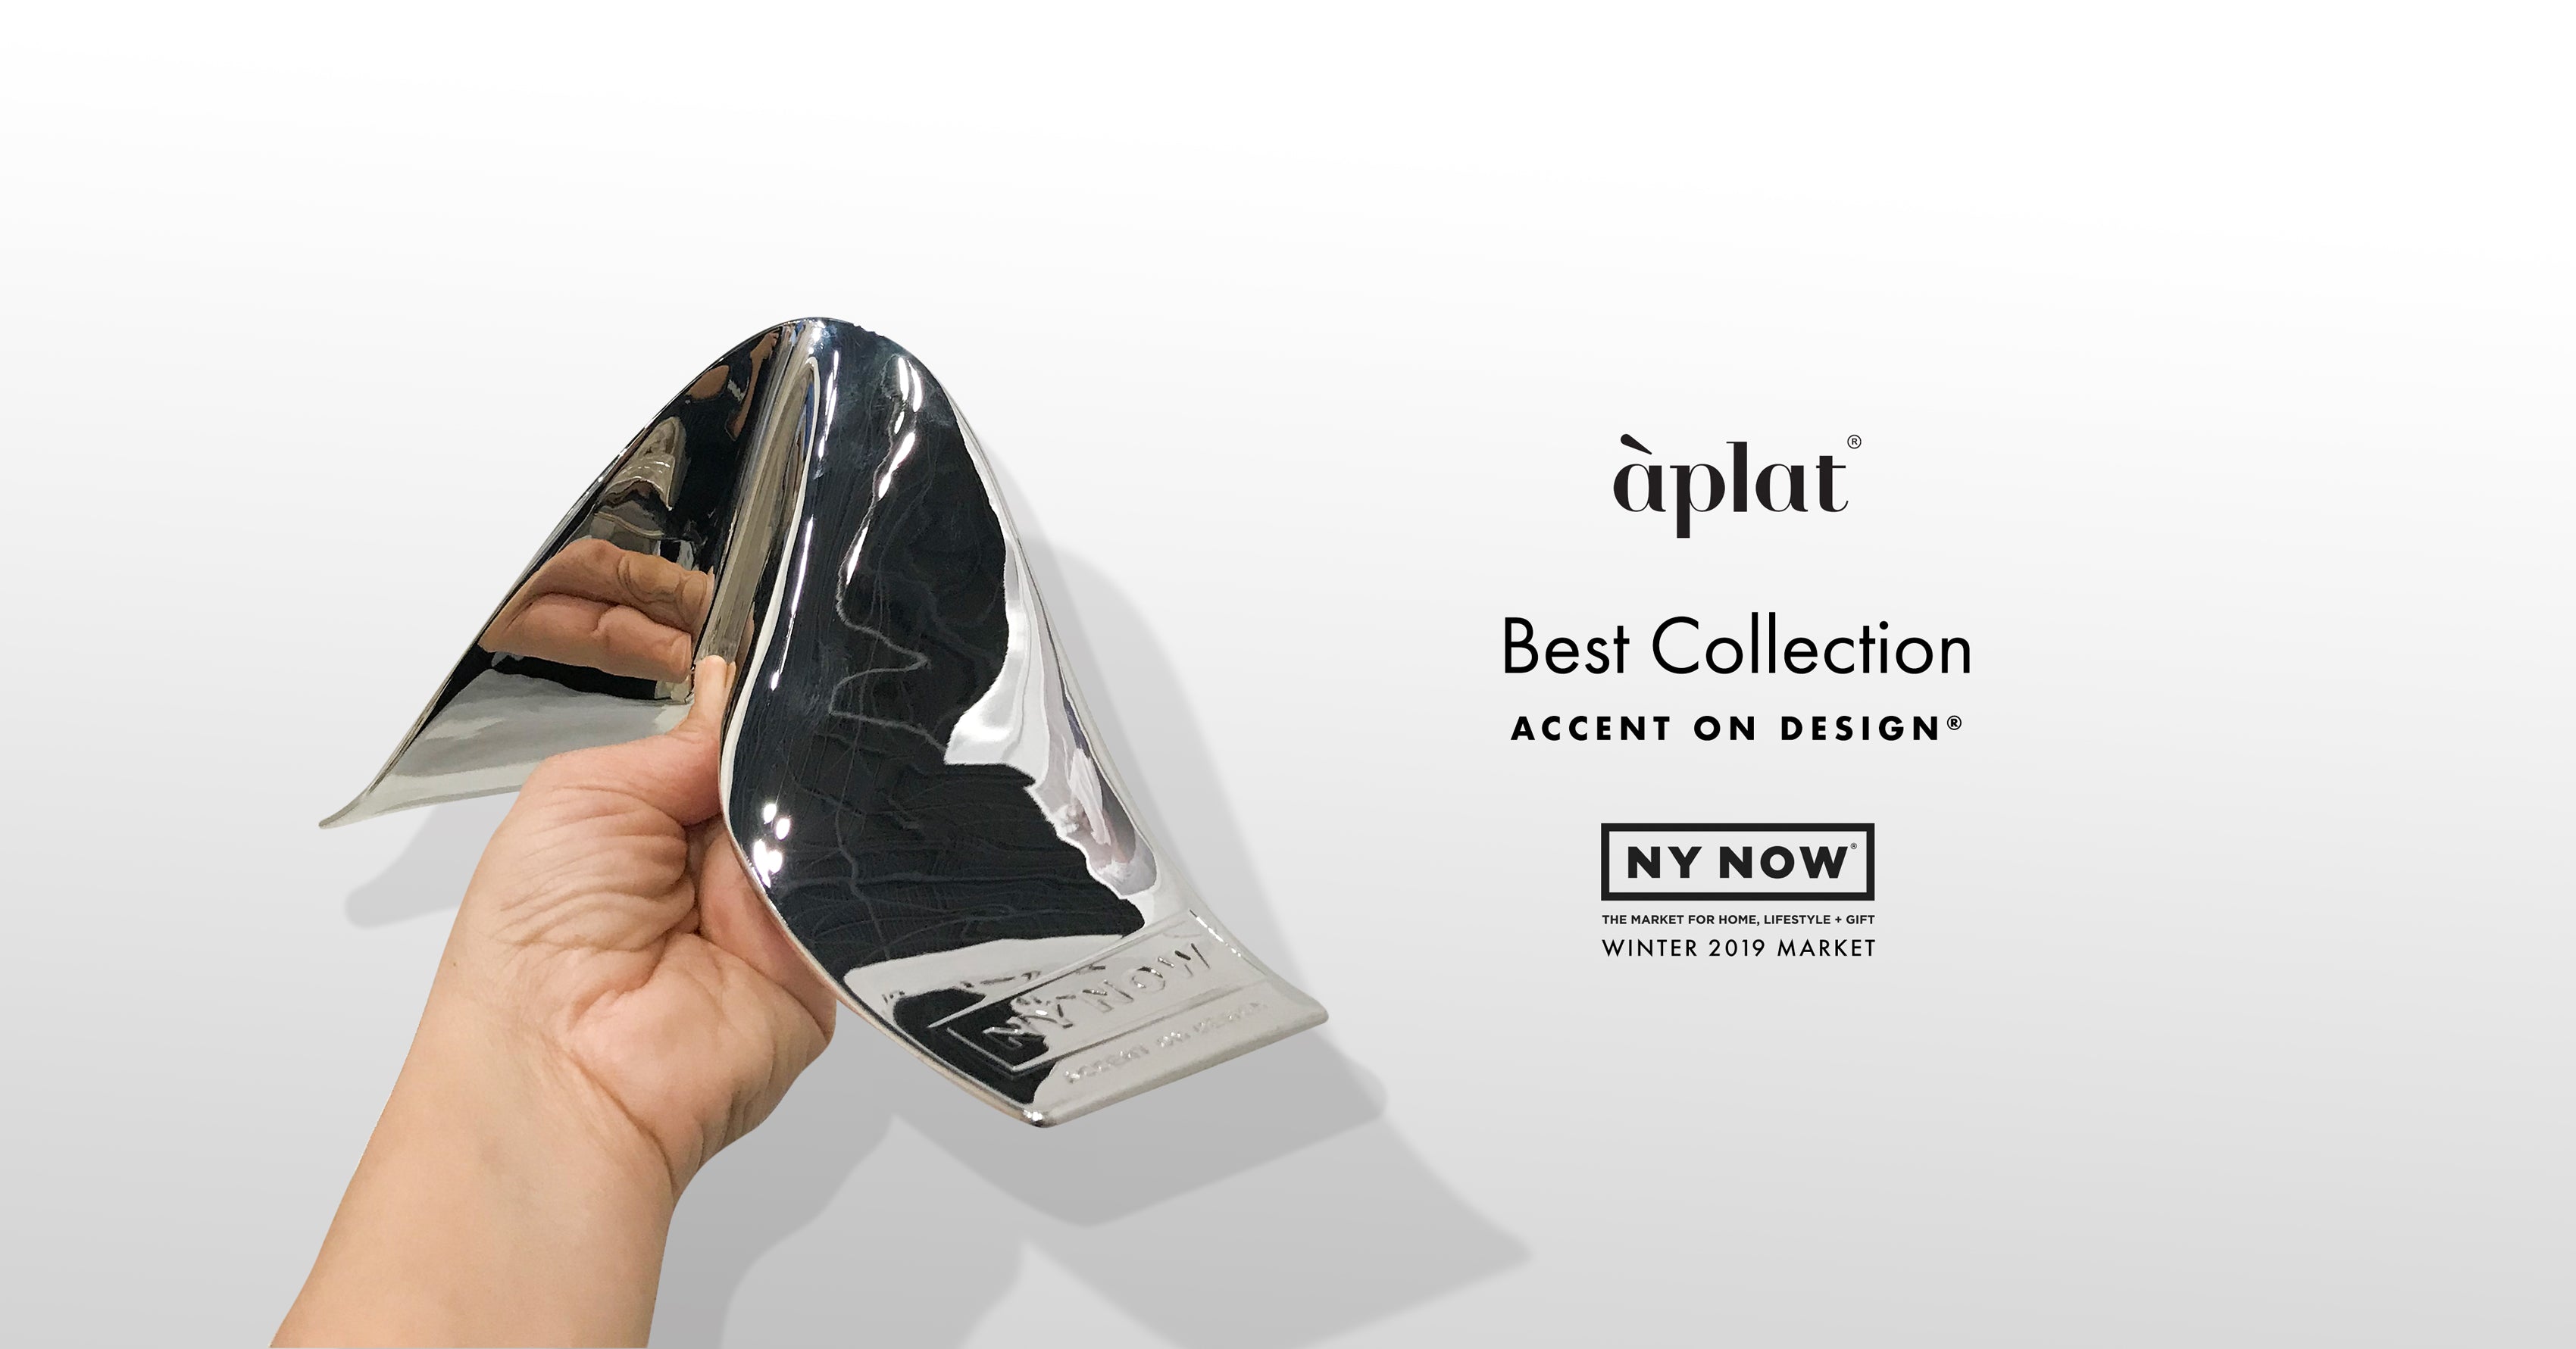 APLAT Named Best Collection at NY NOW!